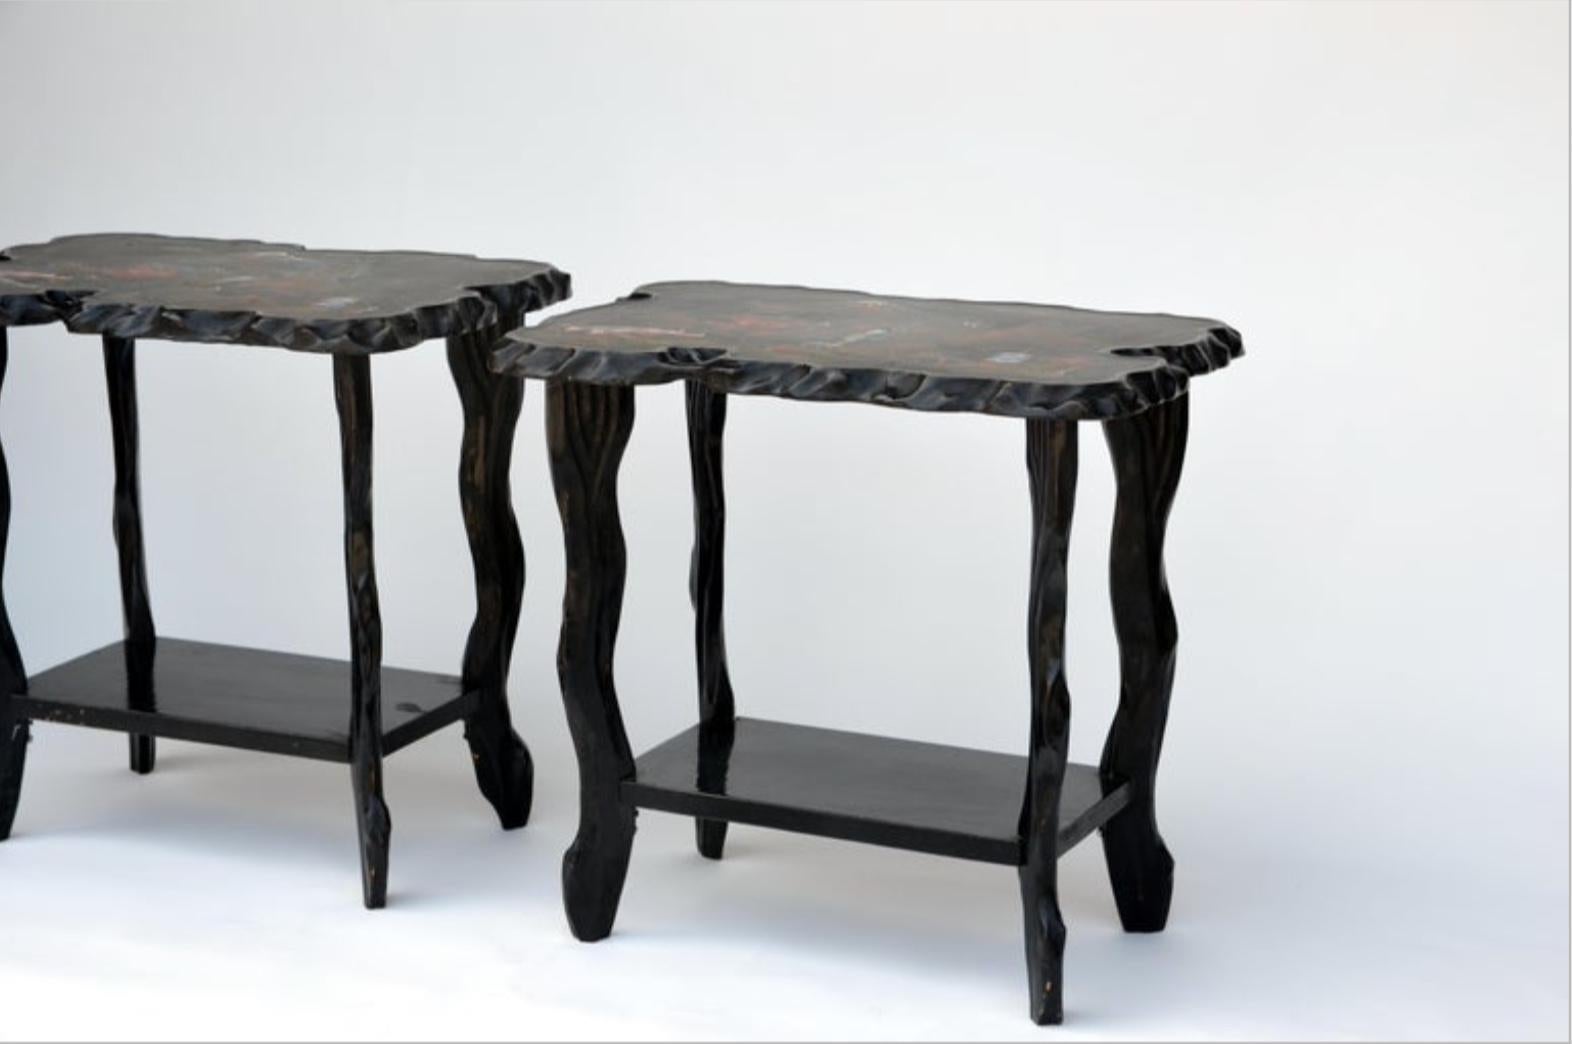 Japonisme Pair of Black Lacquer Ebonized and Inlaid Wood Organic End Tables For Sale